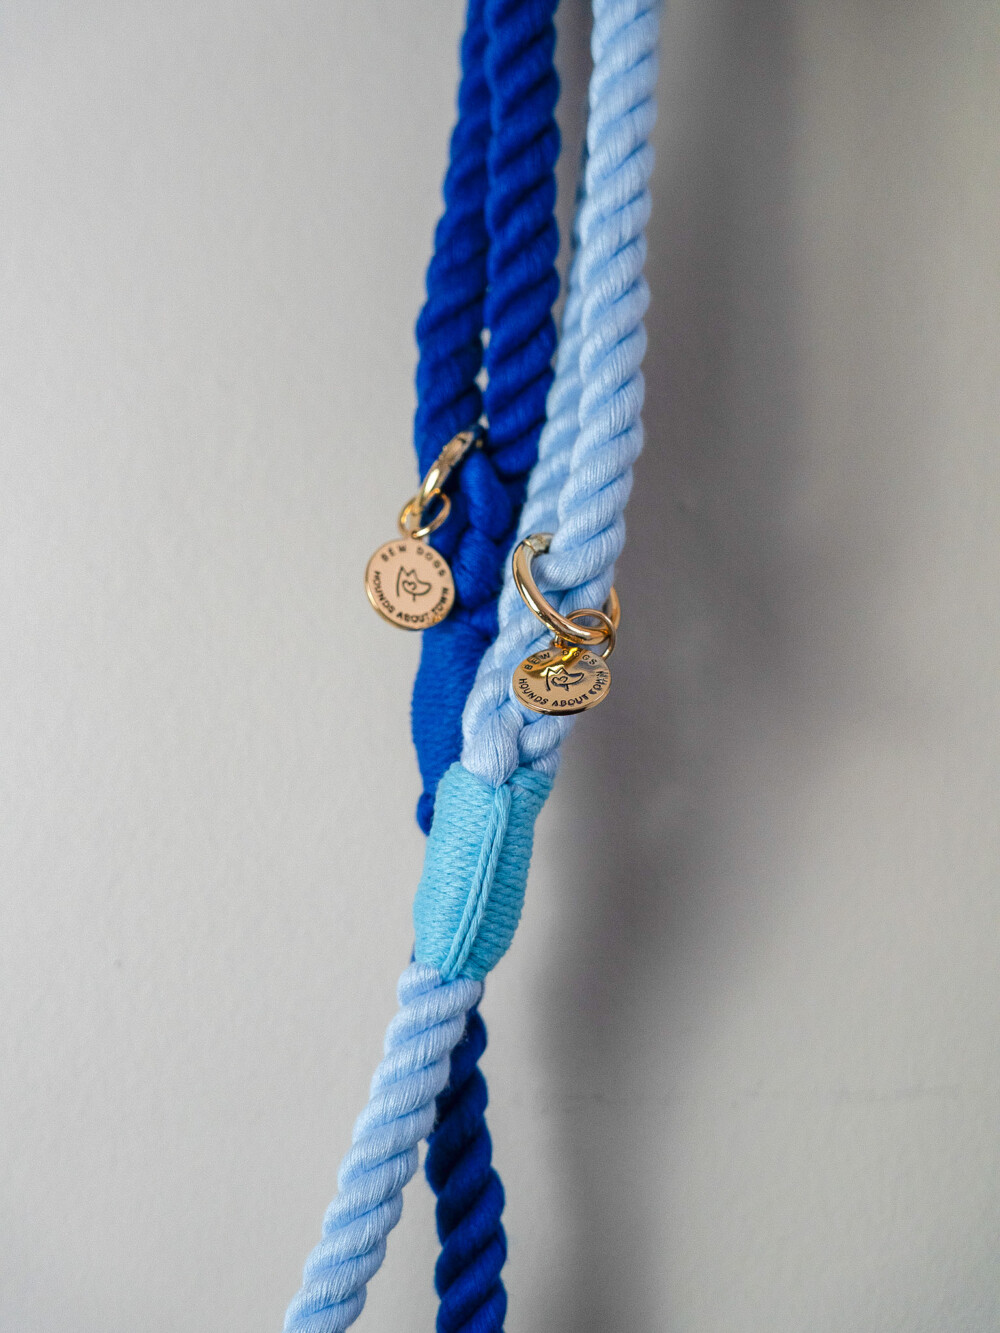 Two blue rope leads, one sky blue and one navy blue against a white background.